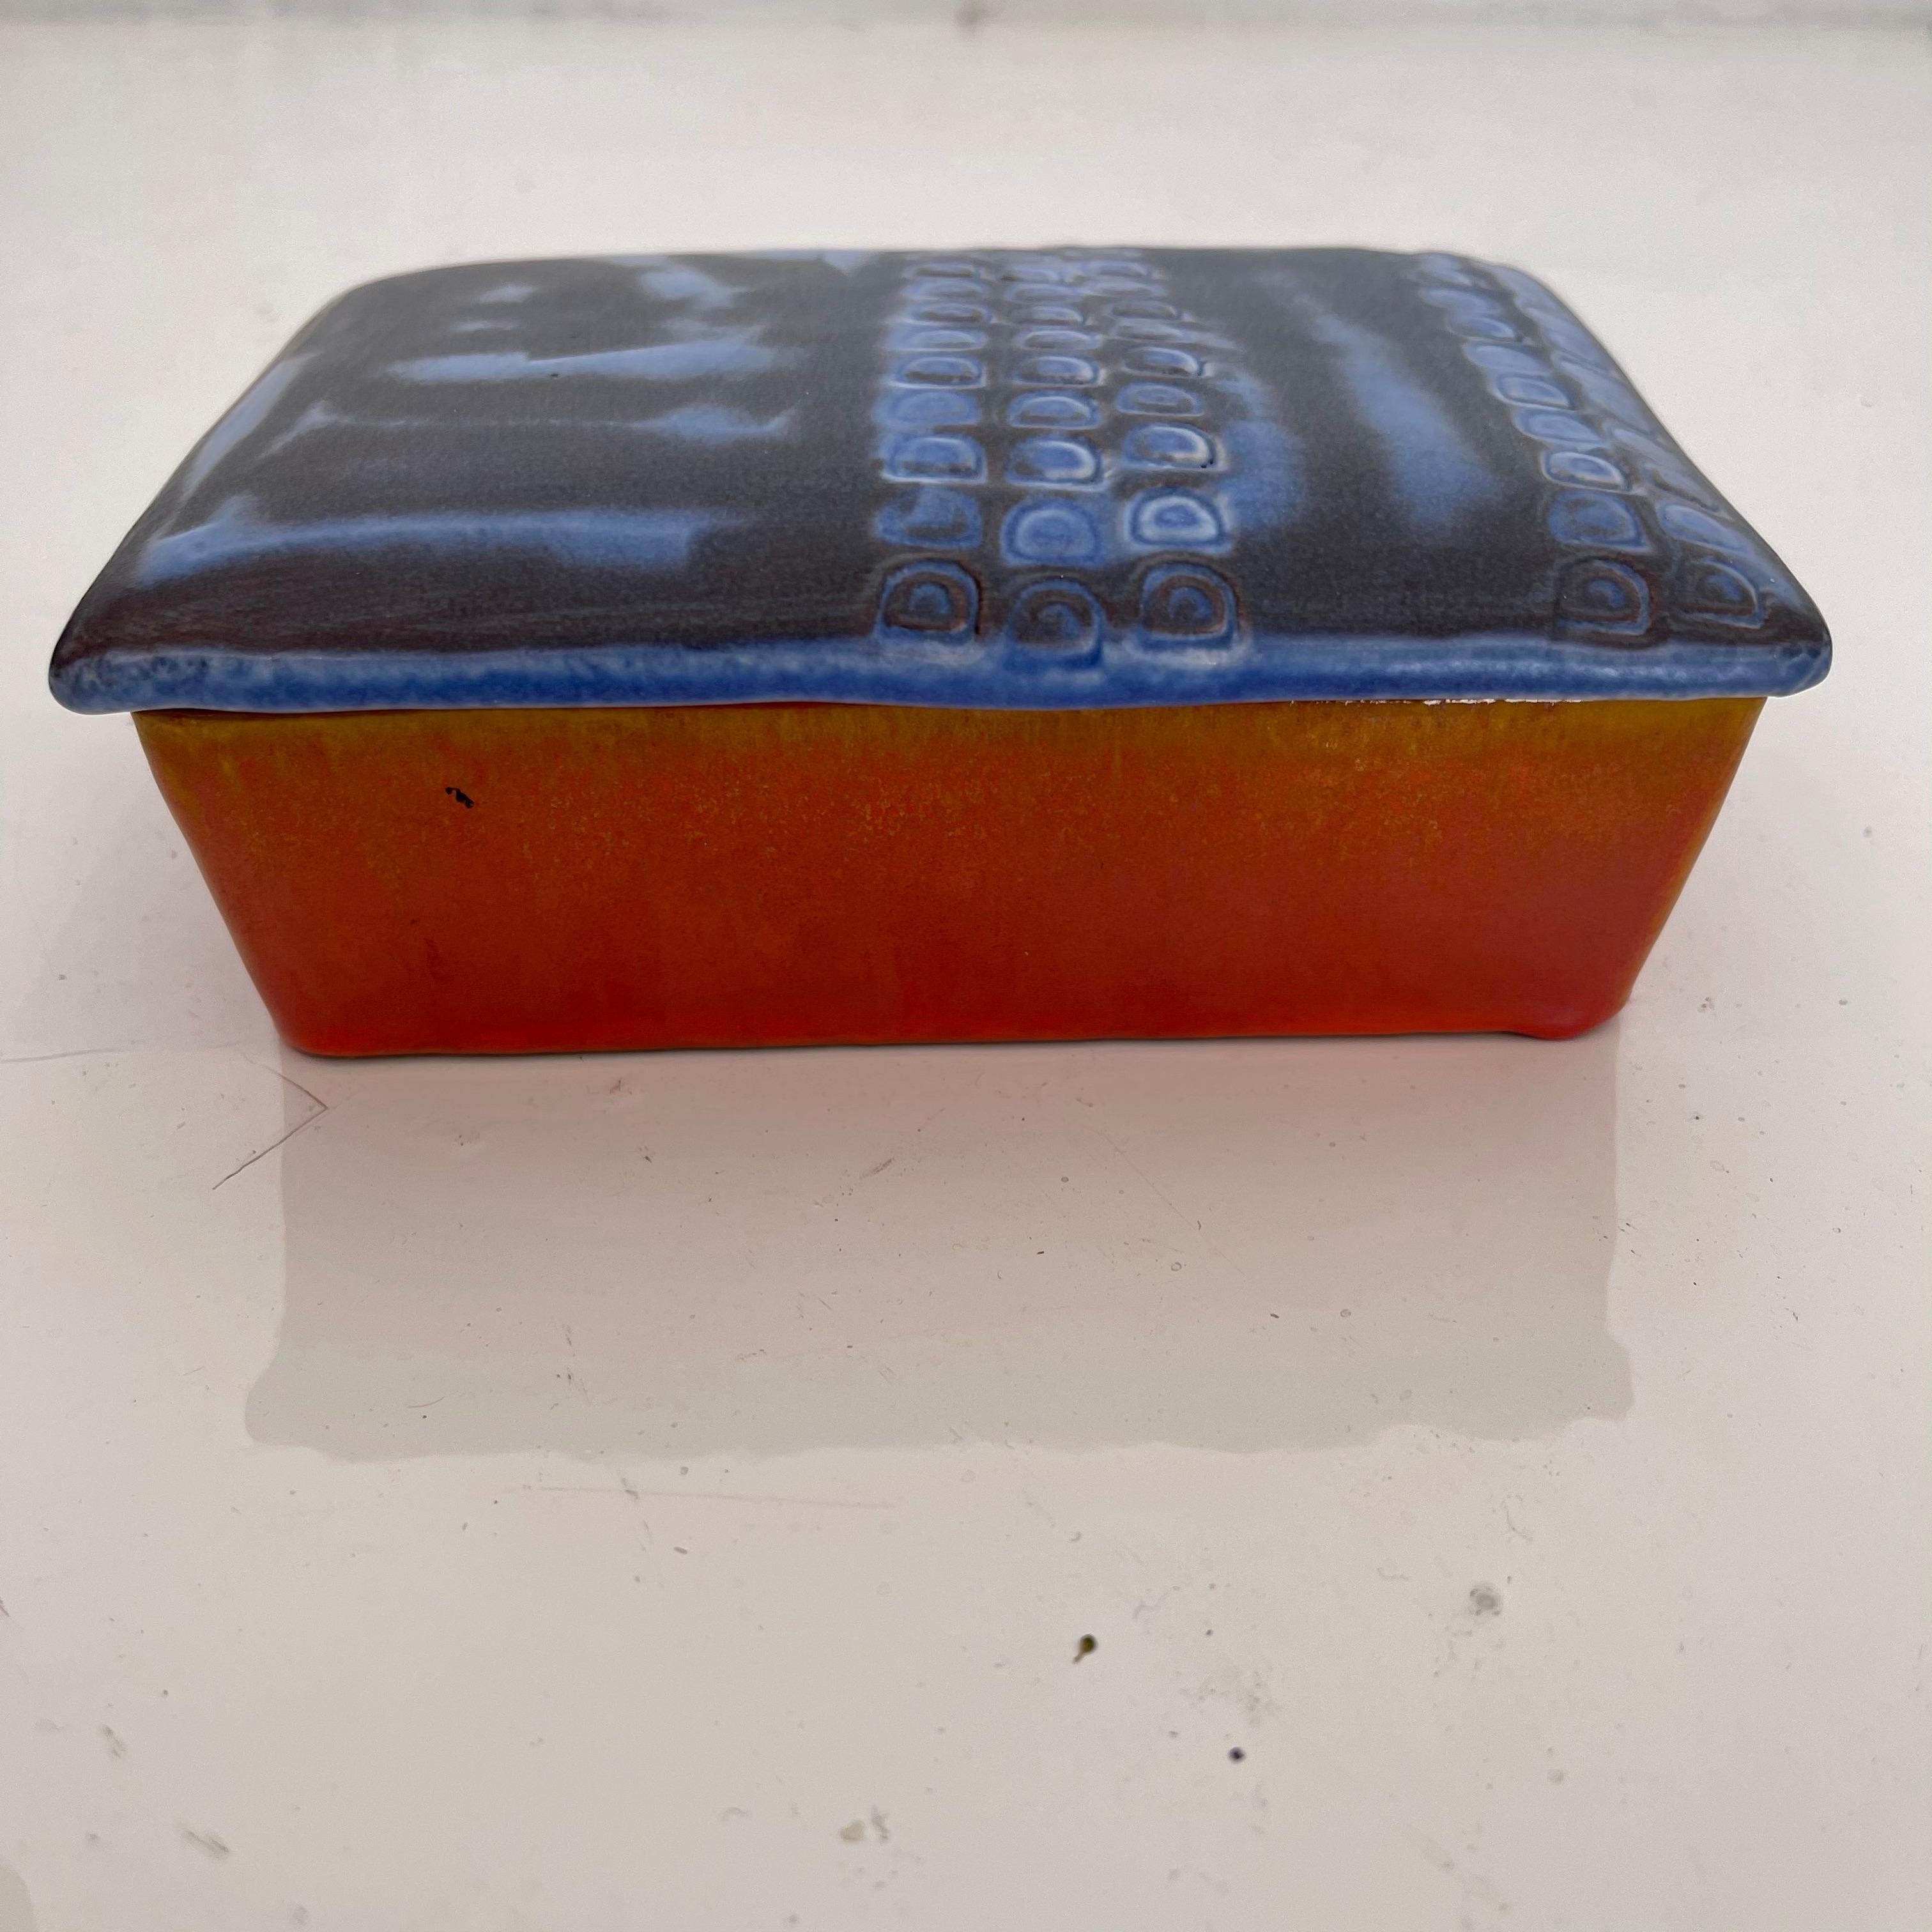 Fantastic ceramic box by Raymor. Stamped Raymor and Italy on underside. Orange base with blue and black lid. Cool colors and great design. Perfect box.